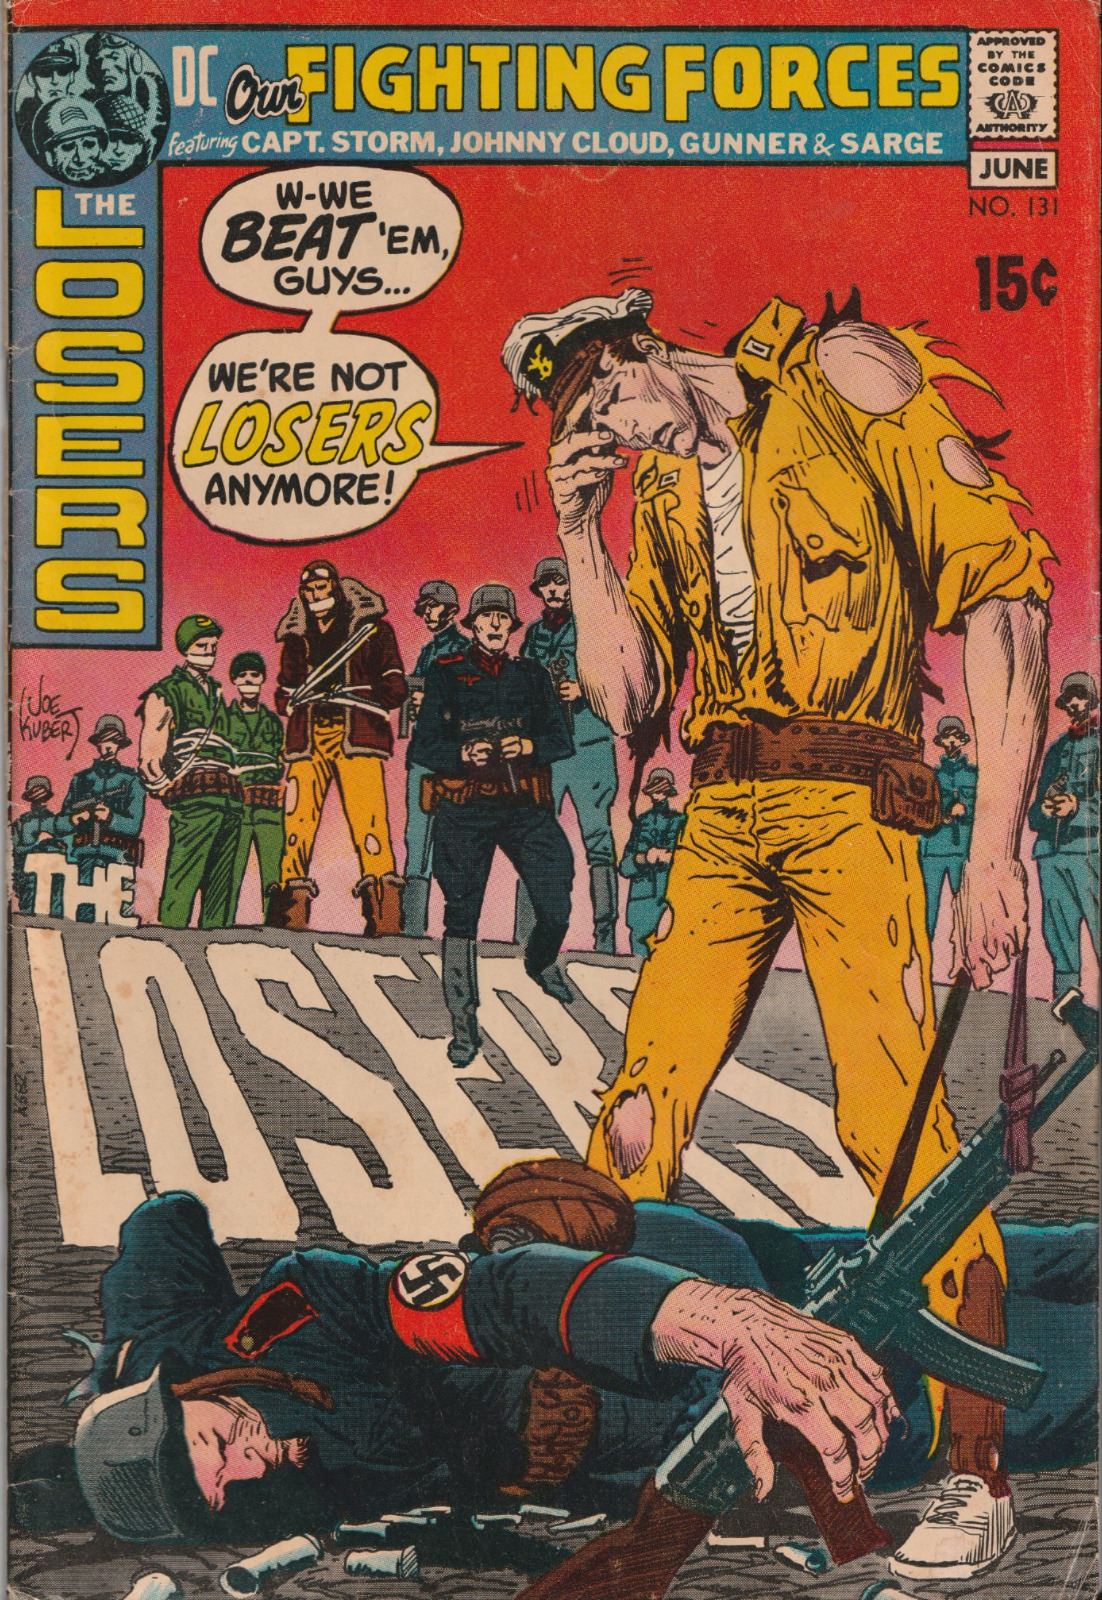 Our Fighting Forces #131 June 1971 VG . Joe Kubert Cover The Losers DC COMICS